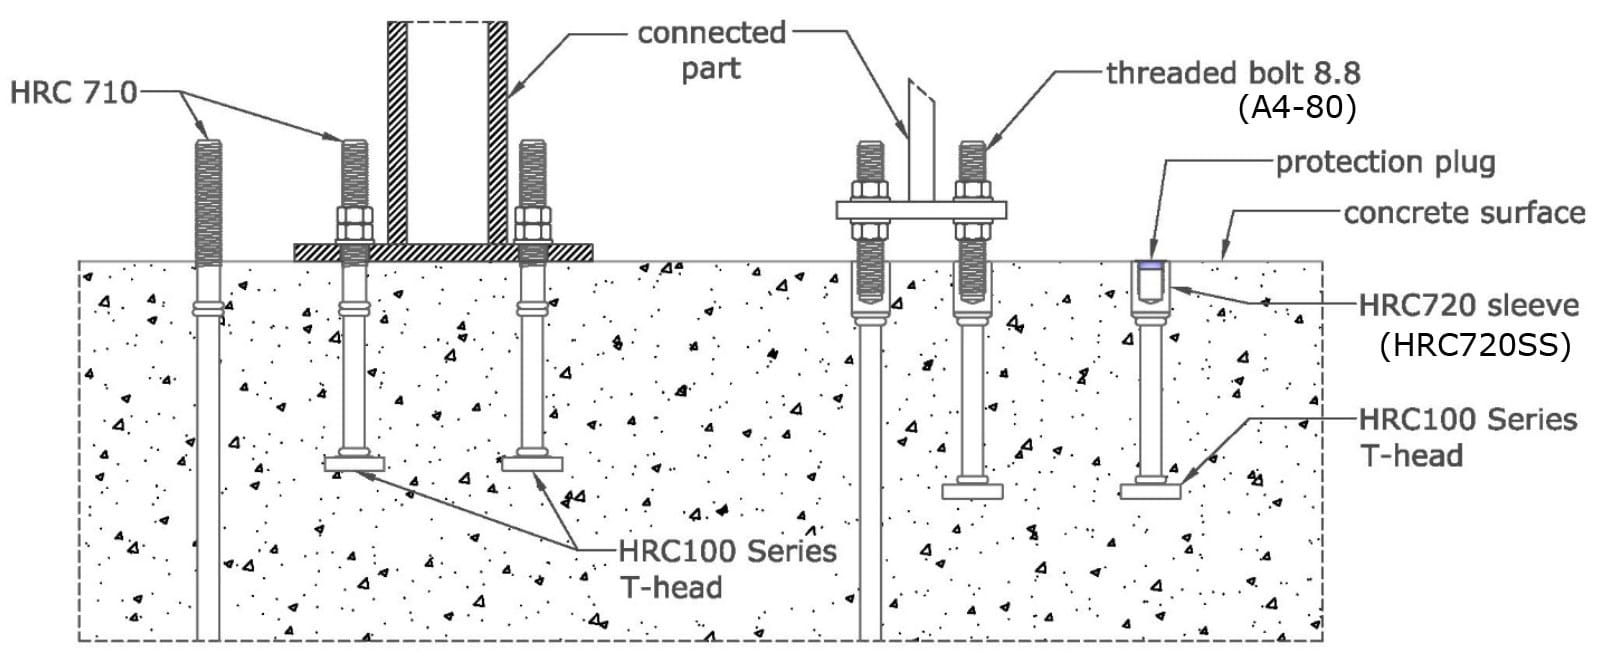 HRC700 Series-illustration of different threaded connections